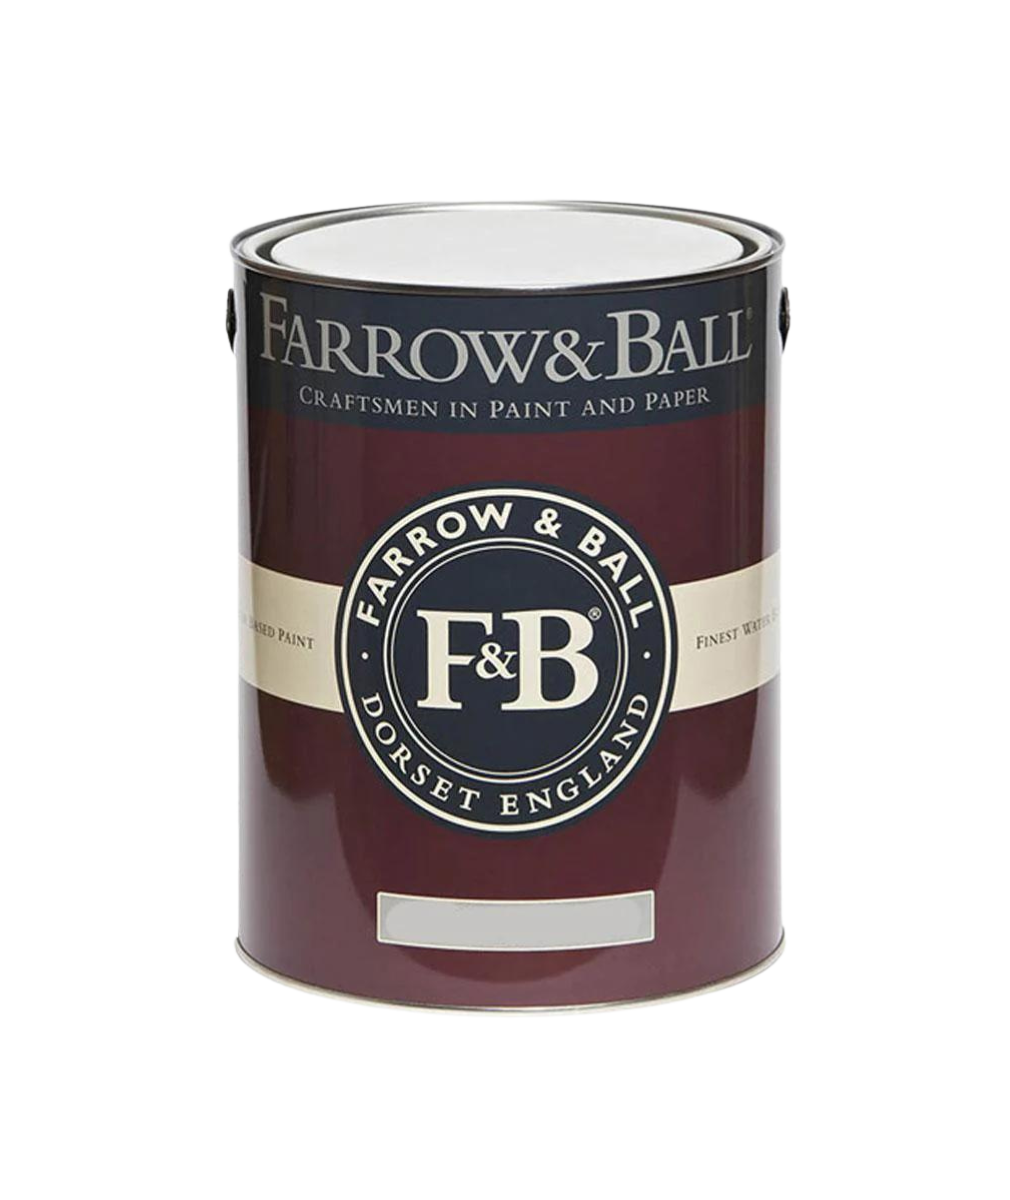 Farrow & Ball Interior Paint is available at Regal Paint Centers.